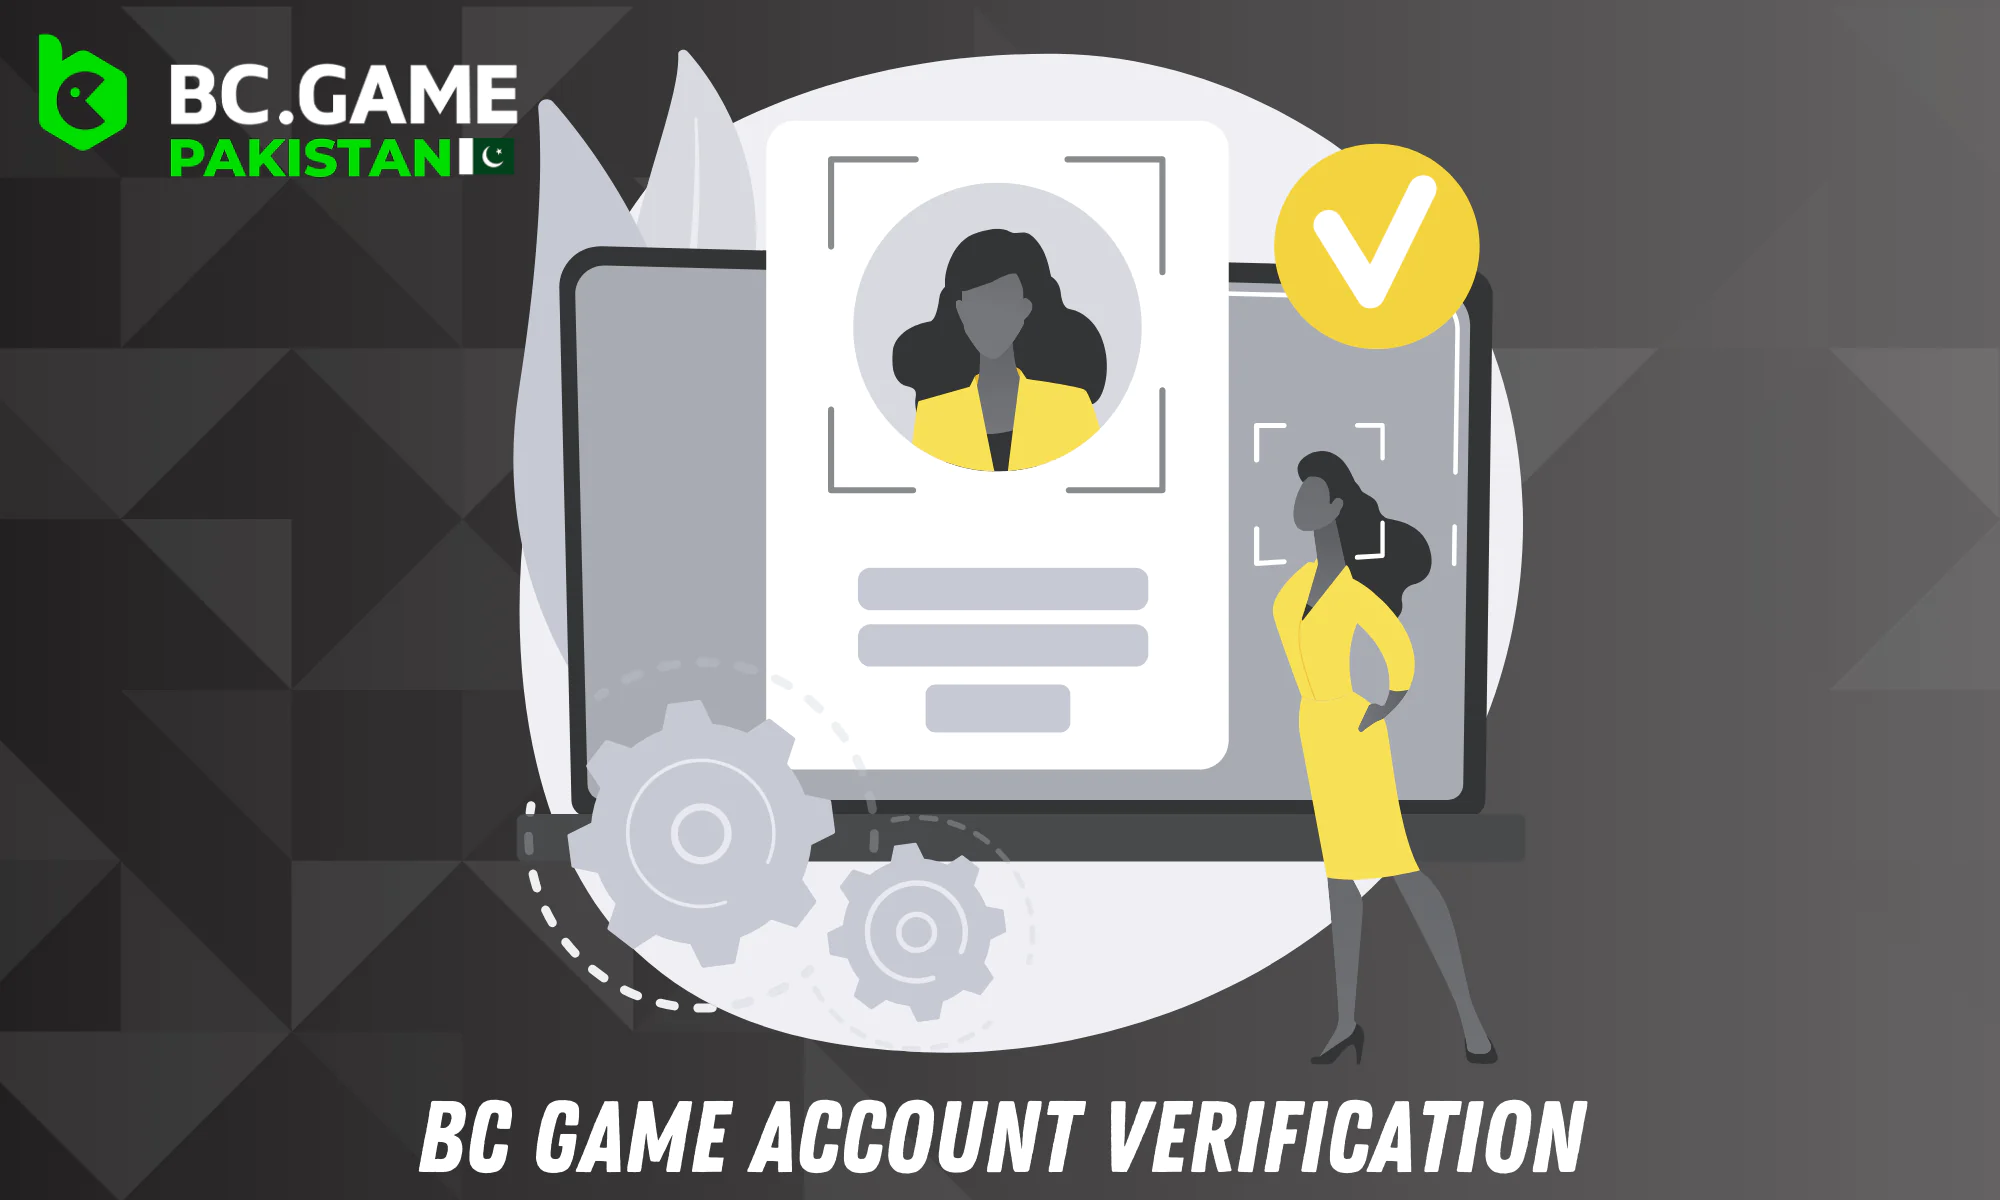 To start the game, you need to verify your data in BC Game